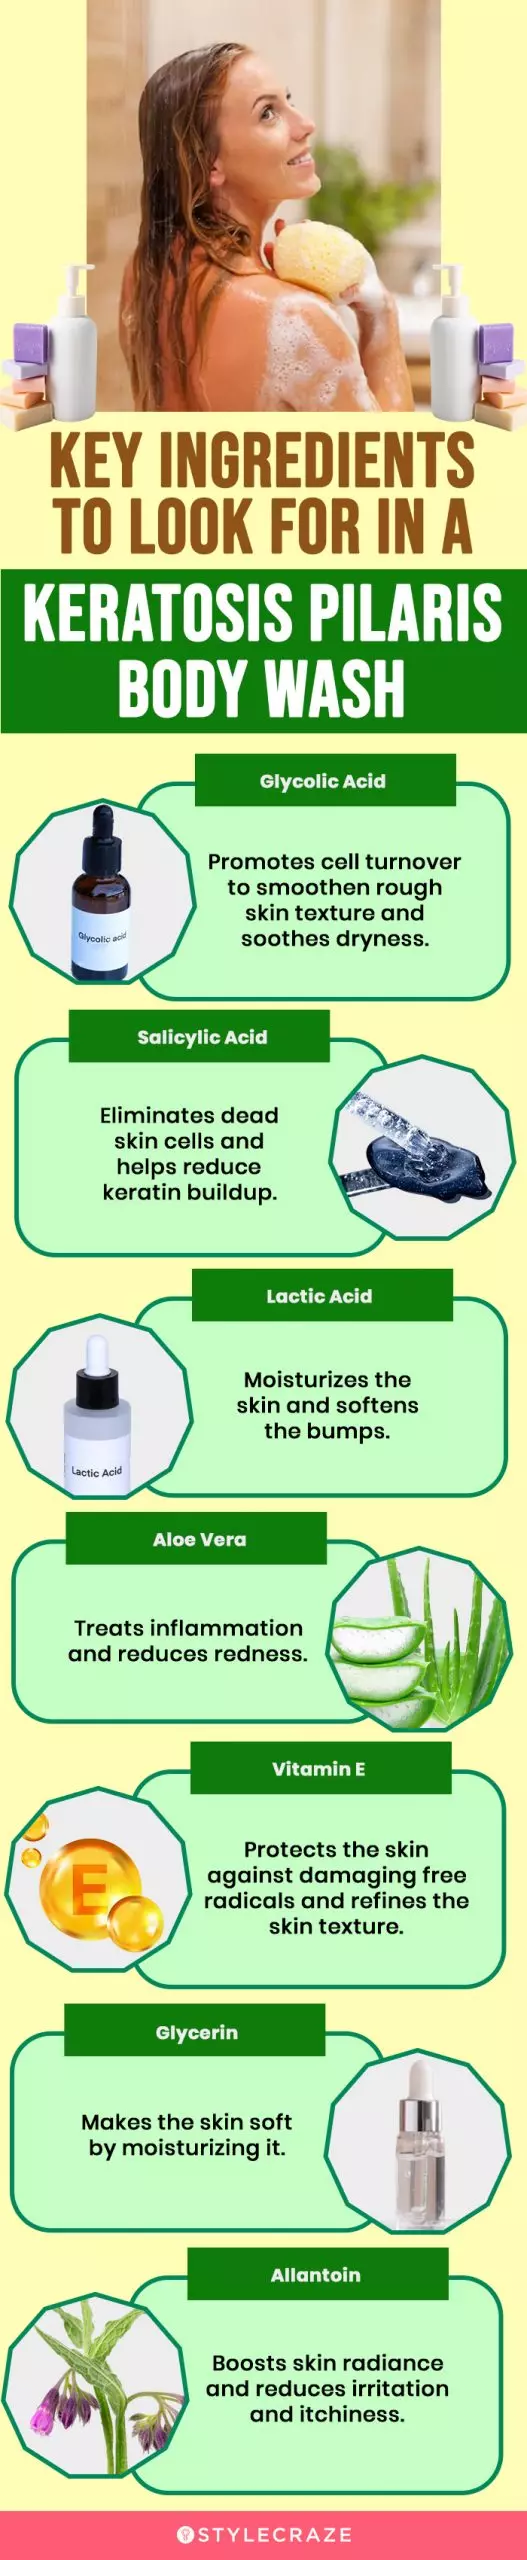 Key Ingredients To Look For In A Keratosis Pilaris Body Wash (infographic)